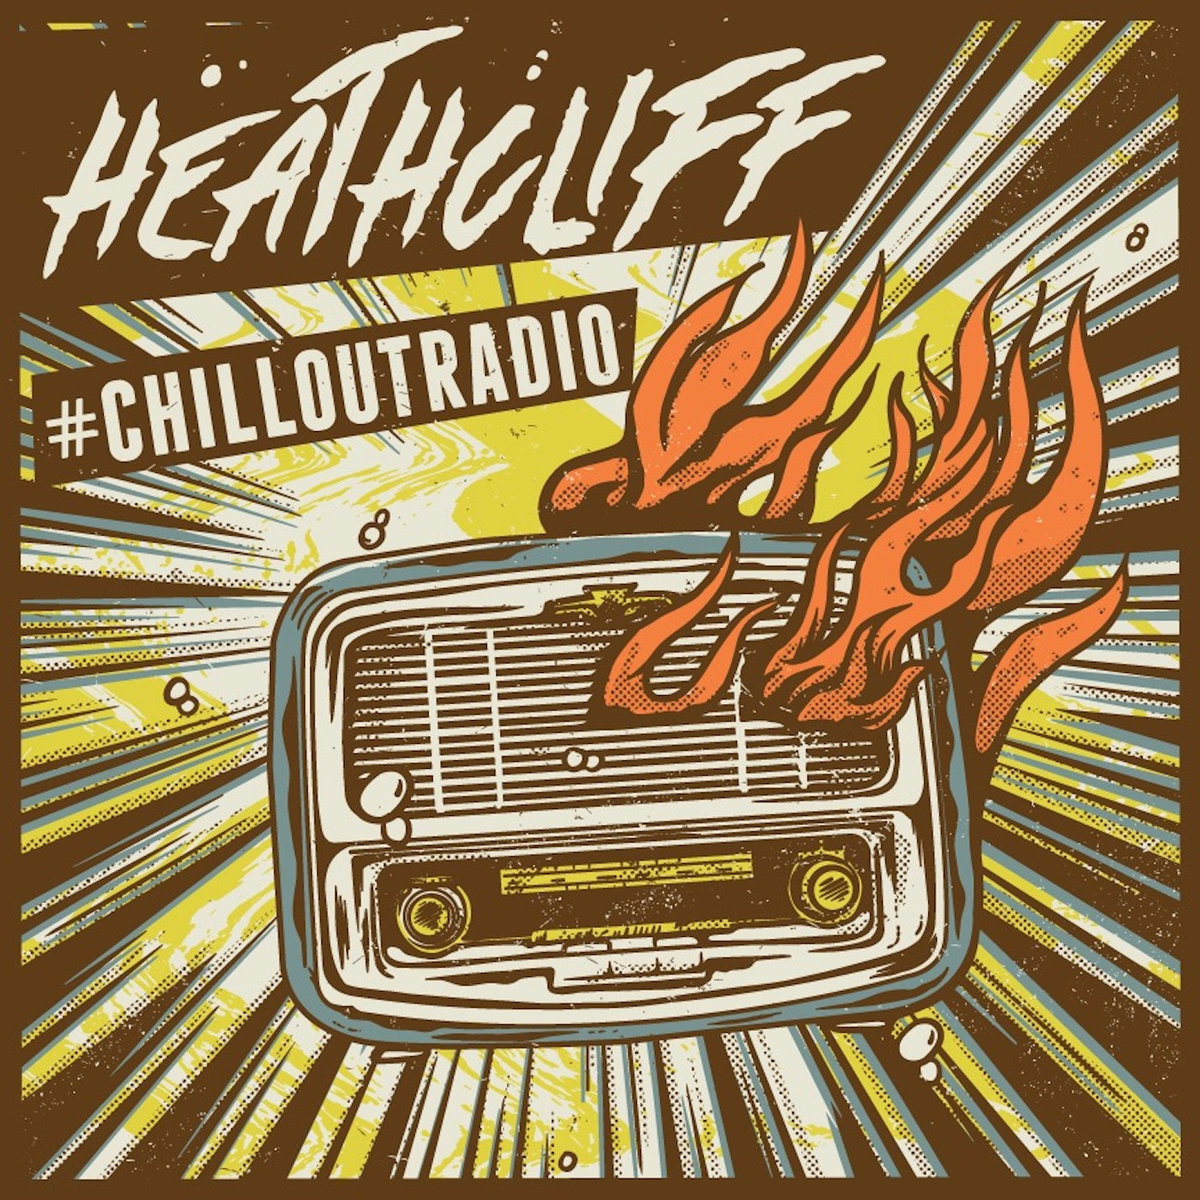 REVIEW: HEATHCLIFF – #CHILLOUTRADIO